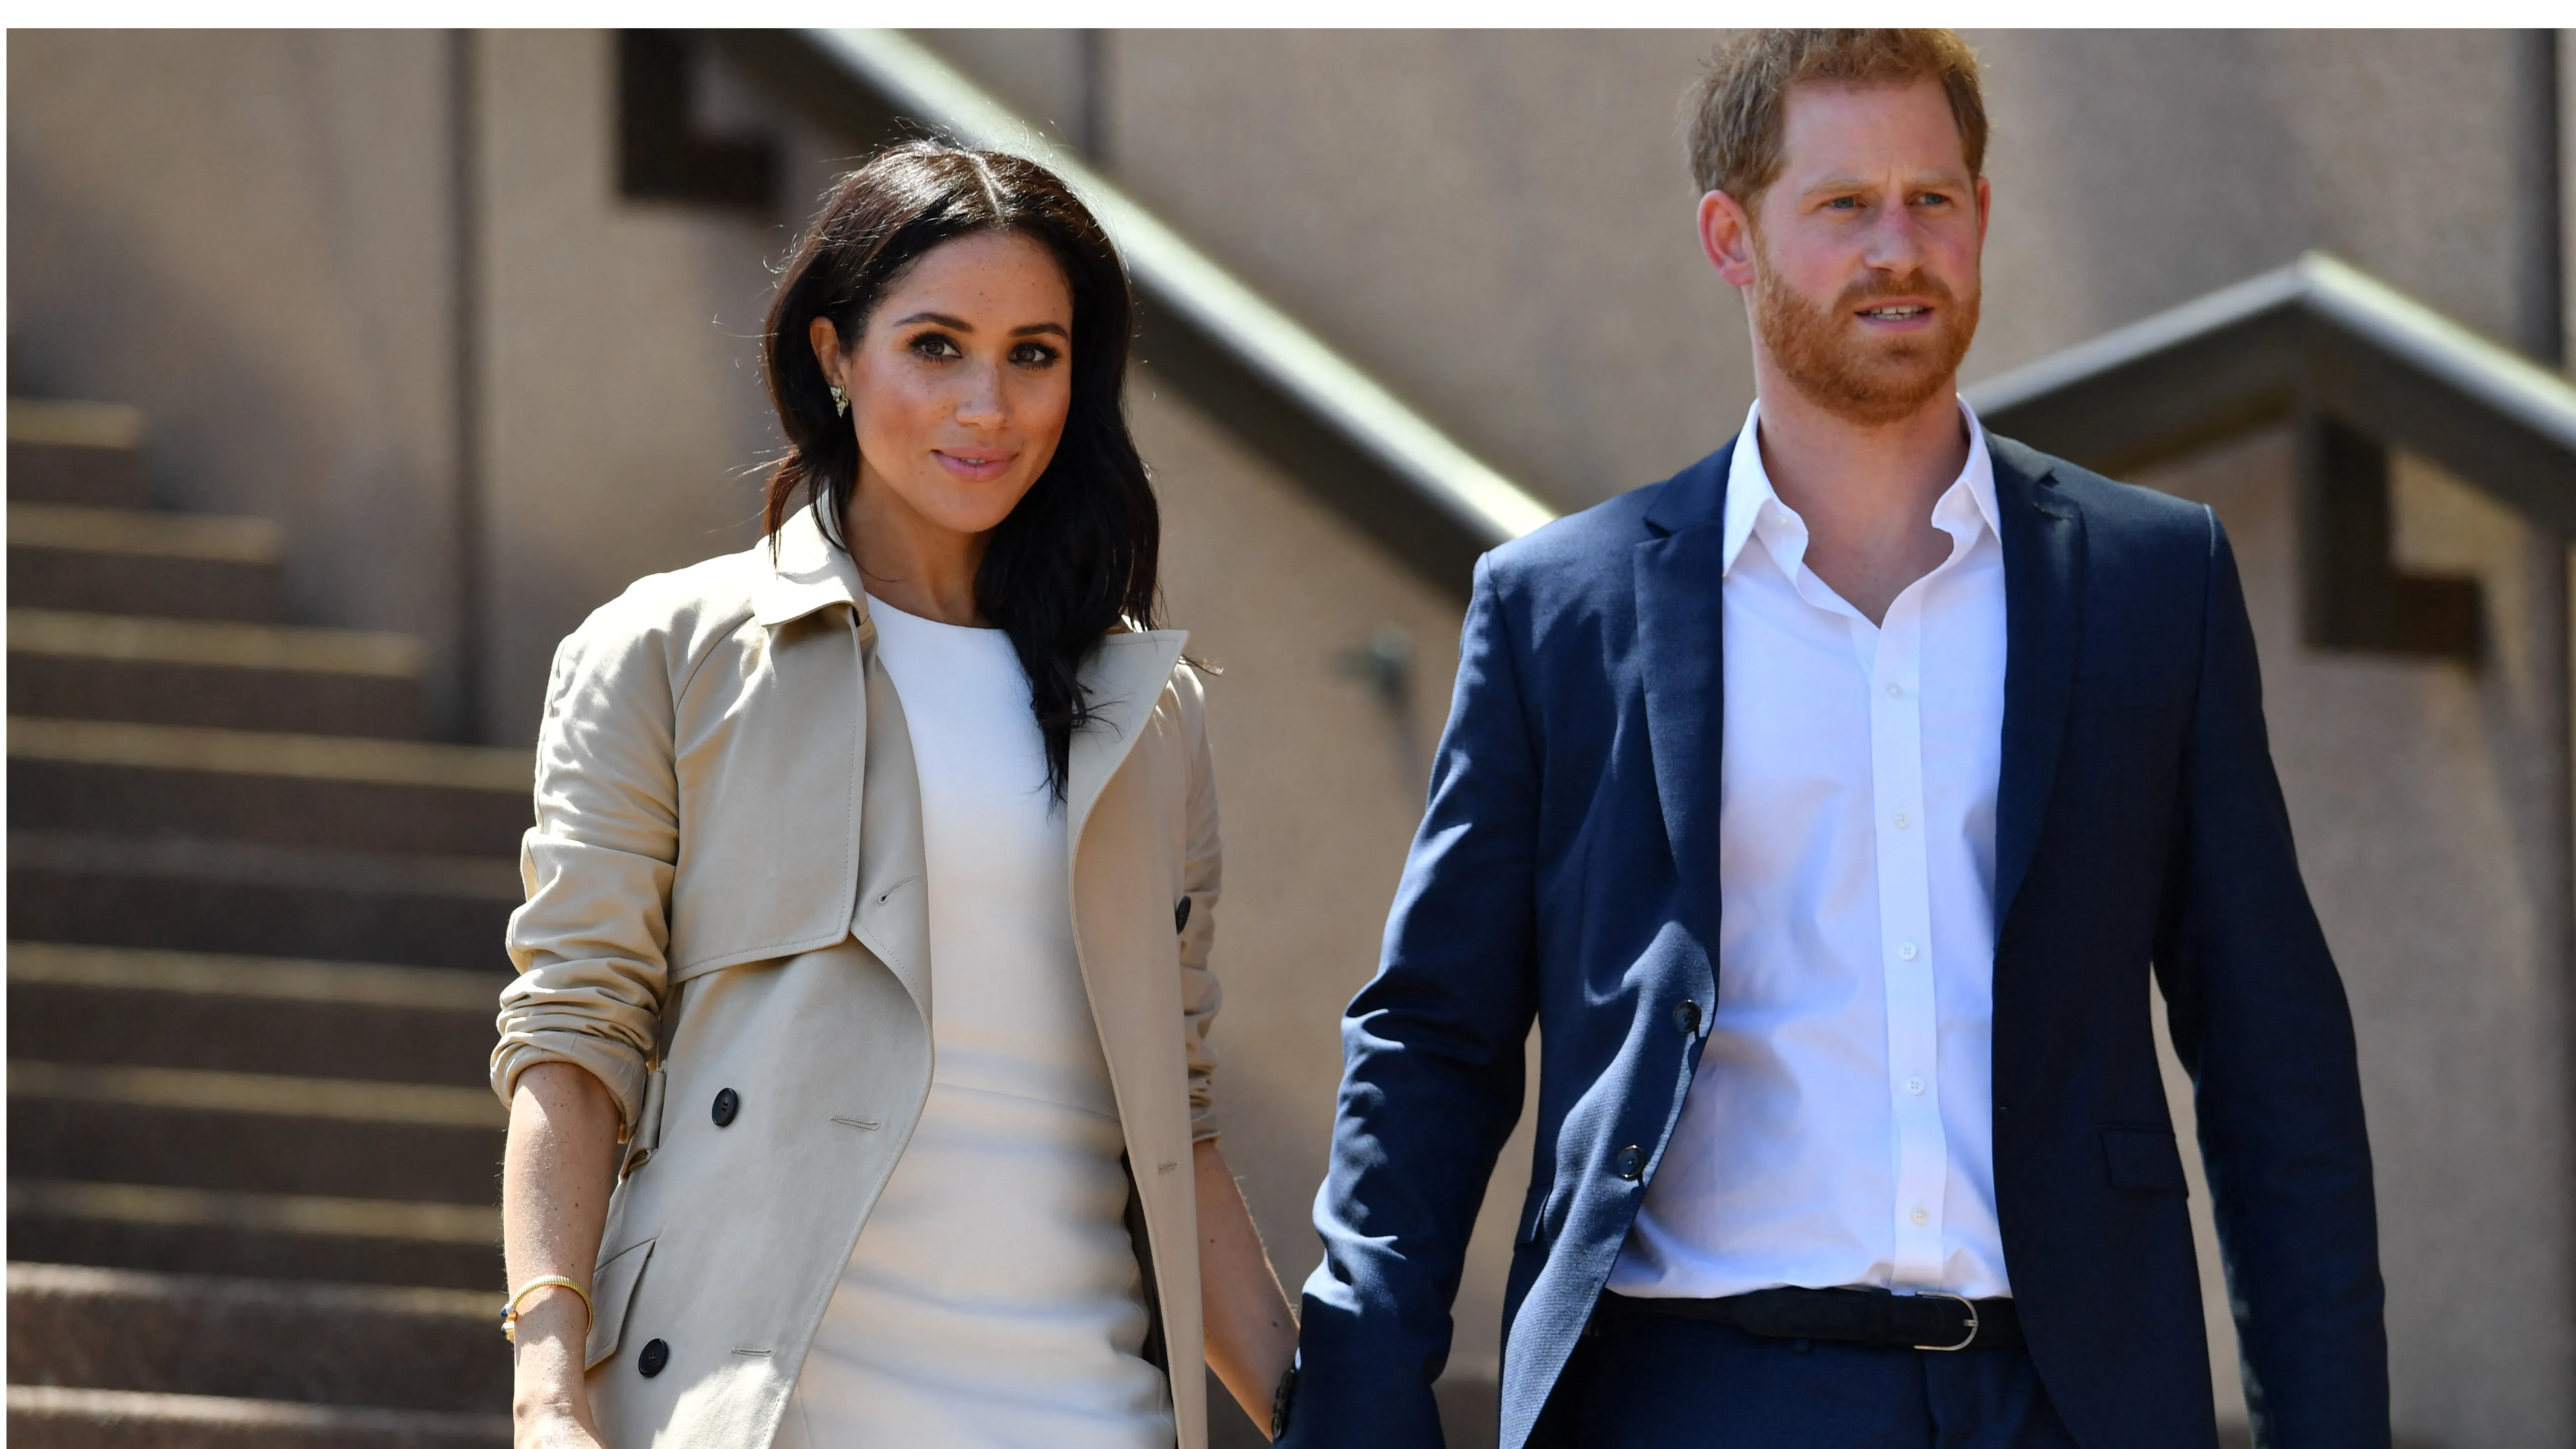 ‘It’s a girl’: Prince Harry, Meghan Markle reveal second child’s gender